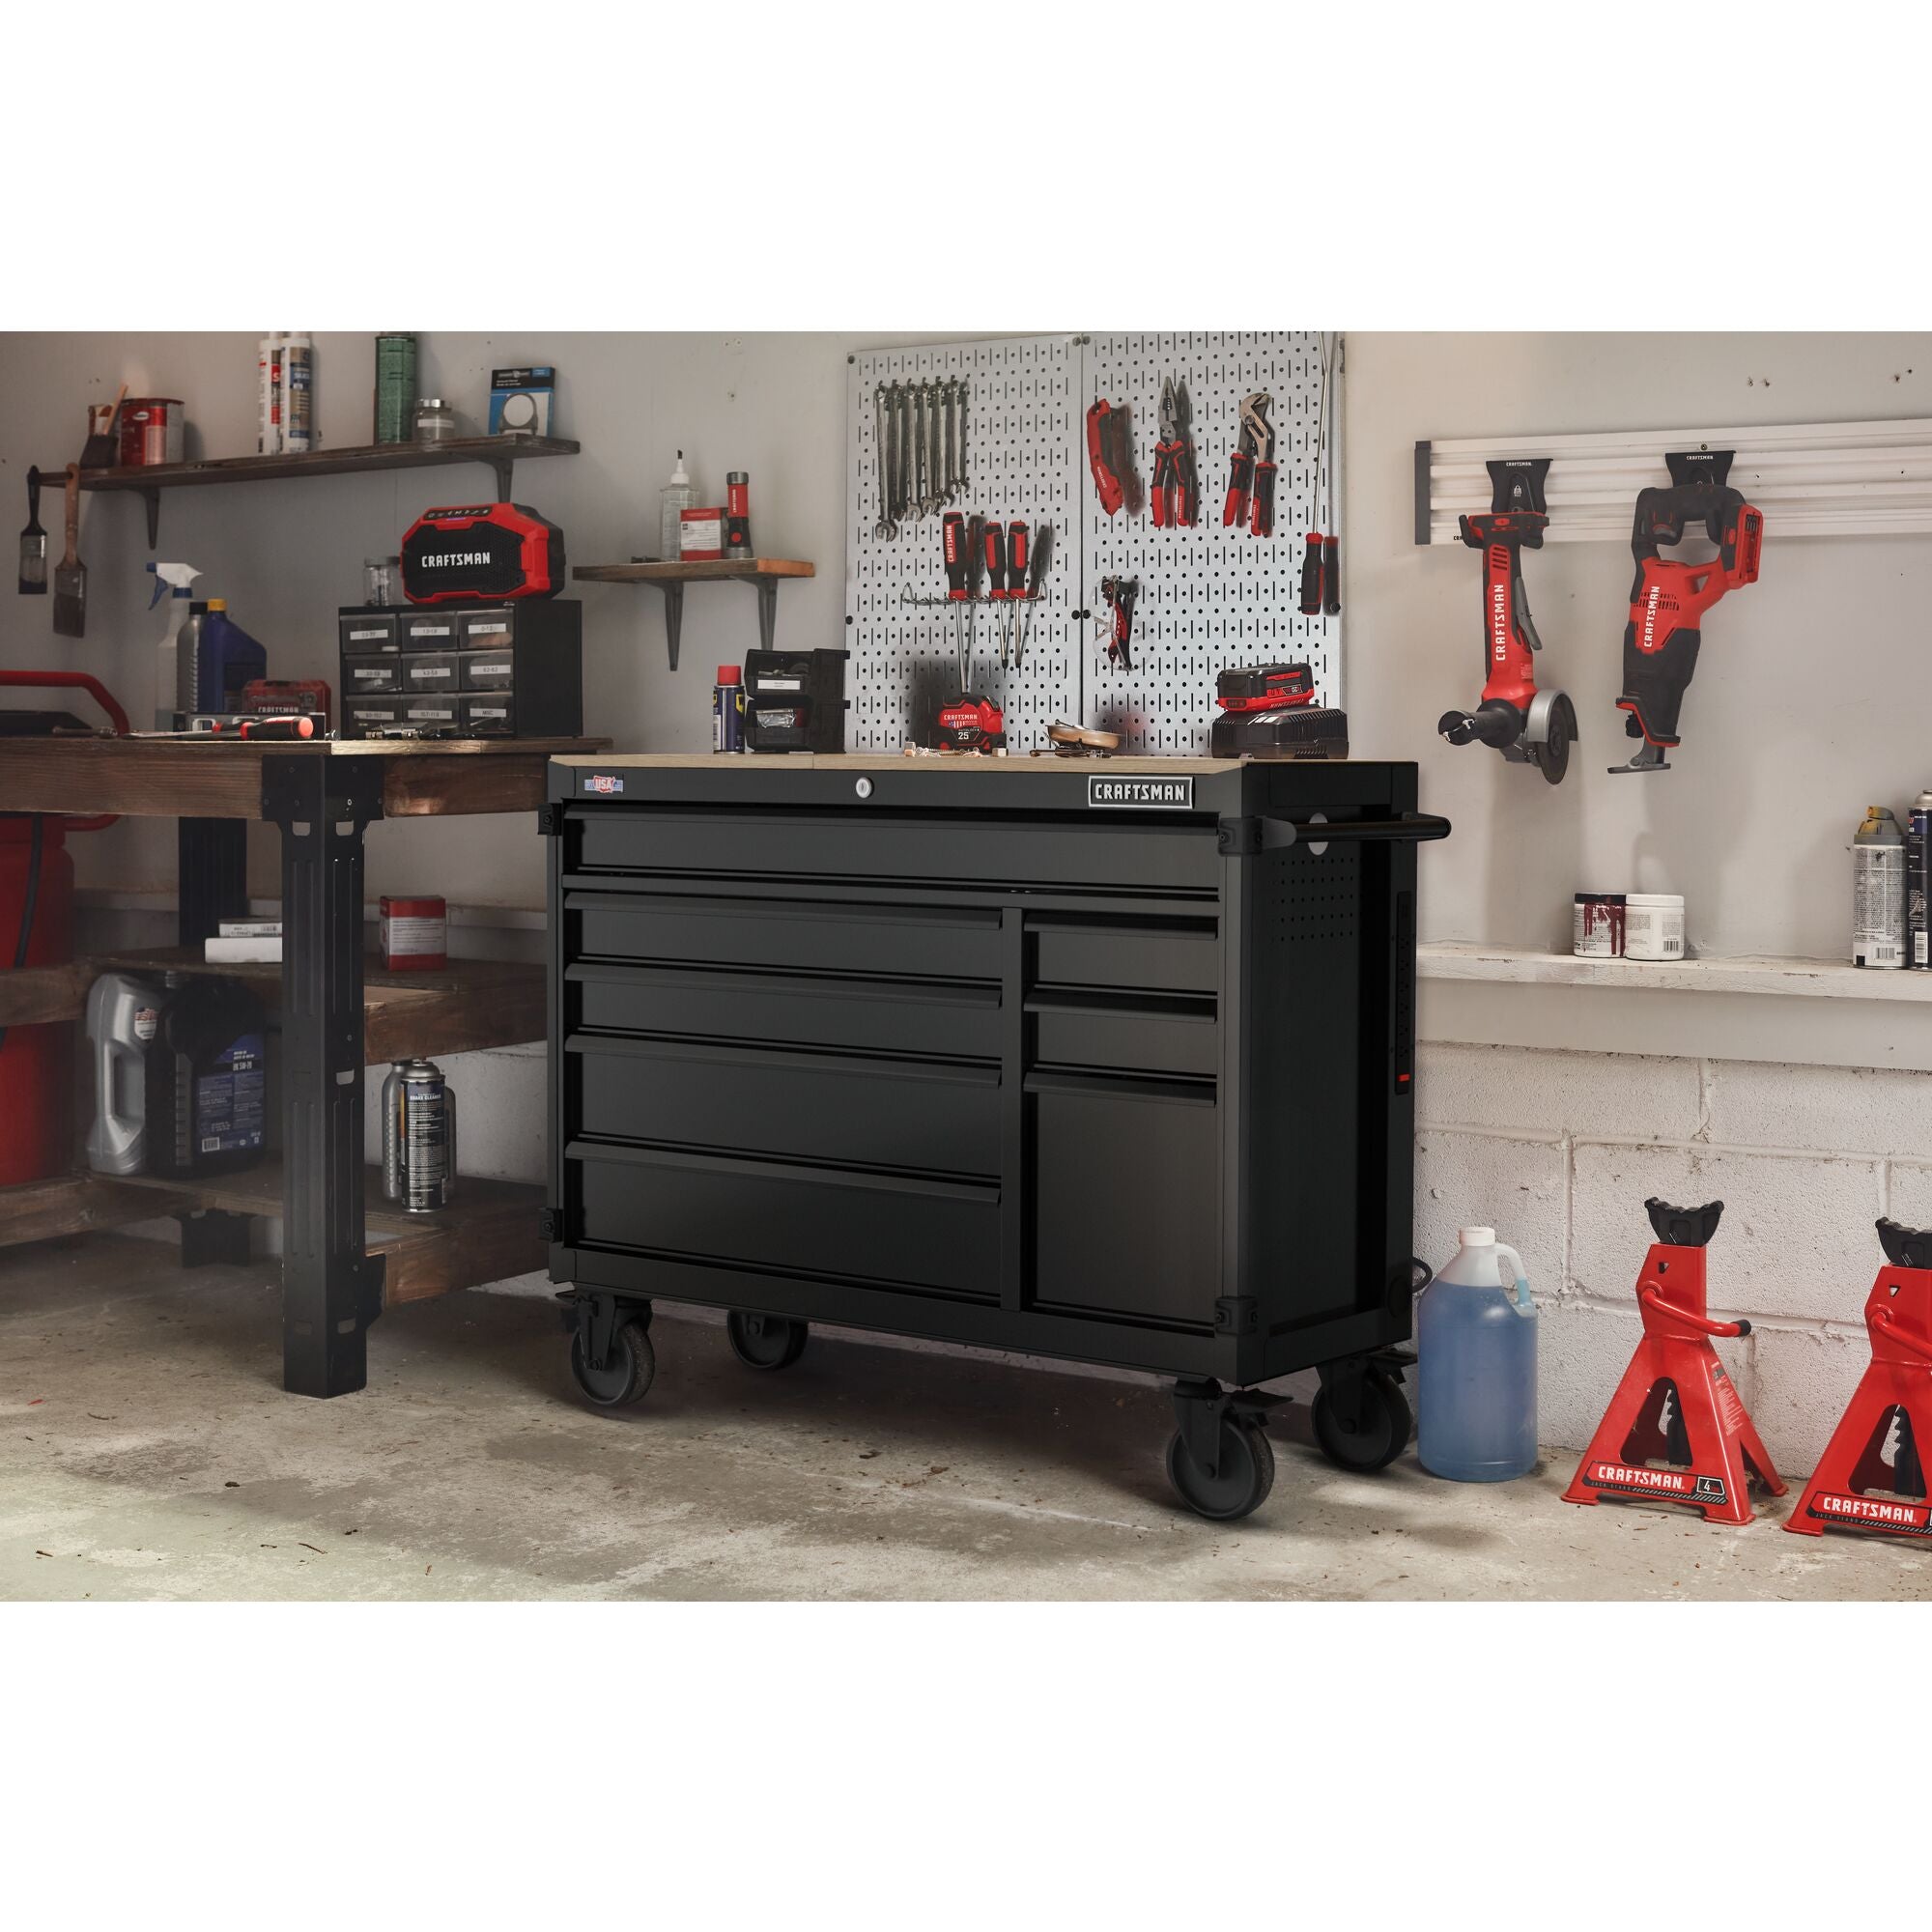 Craftsman Launches V-Series Pro Tool Storage